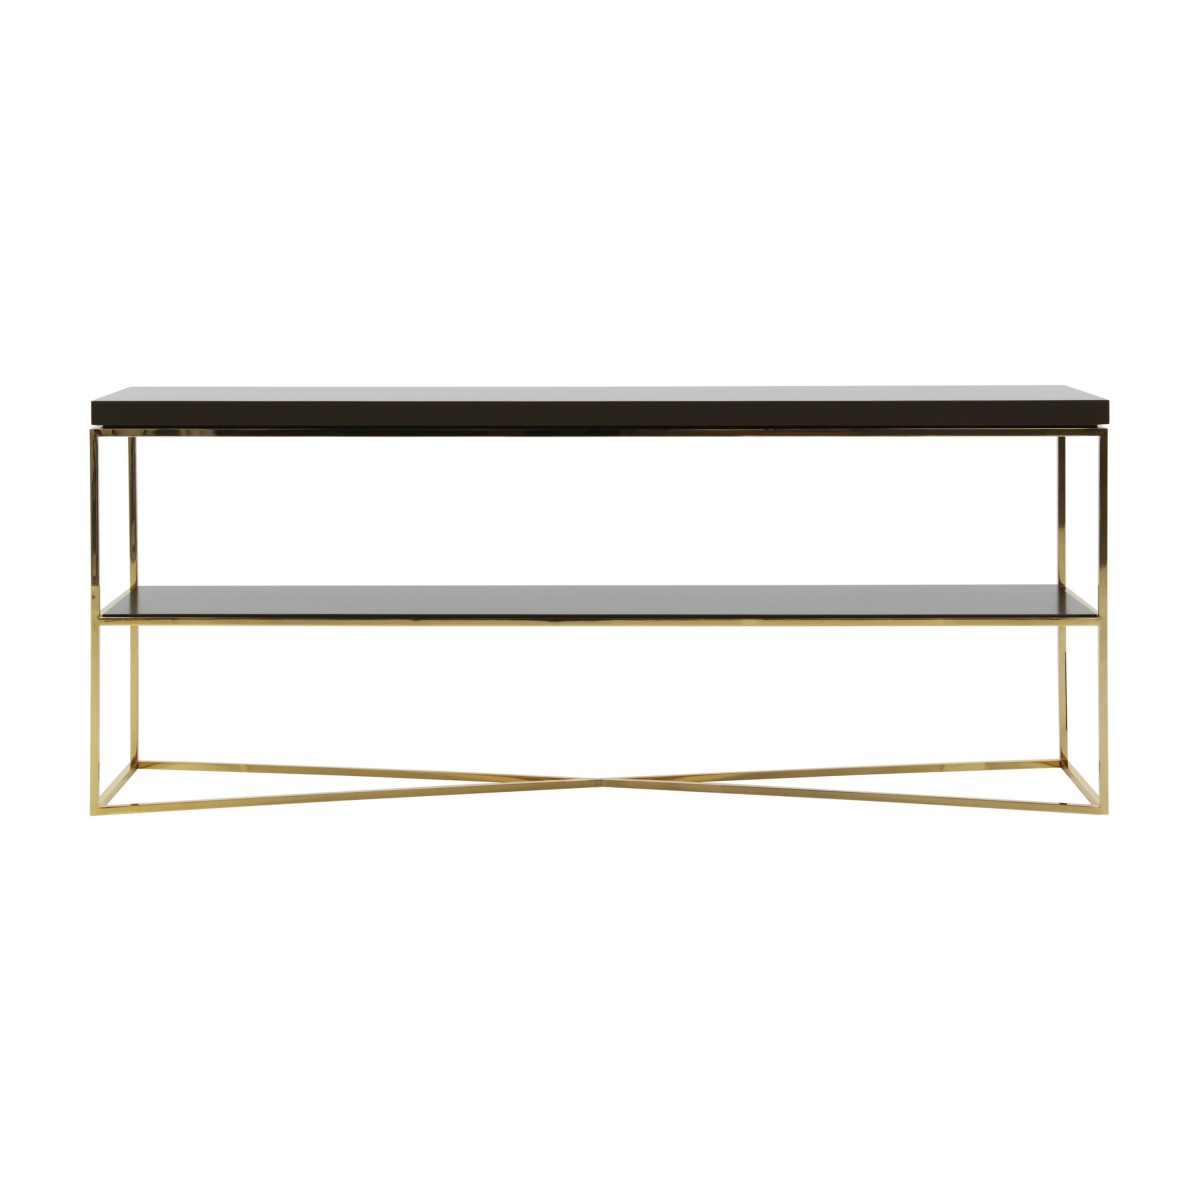 Italian modern console, rectangular console table with wood top and one middle shelf. Contemporary console with gold plated metal base 